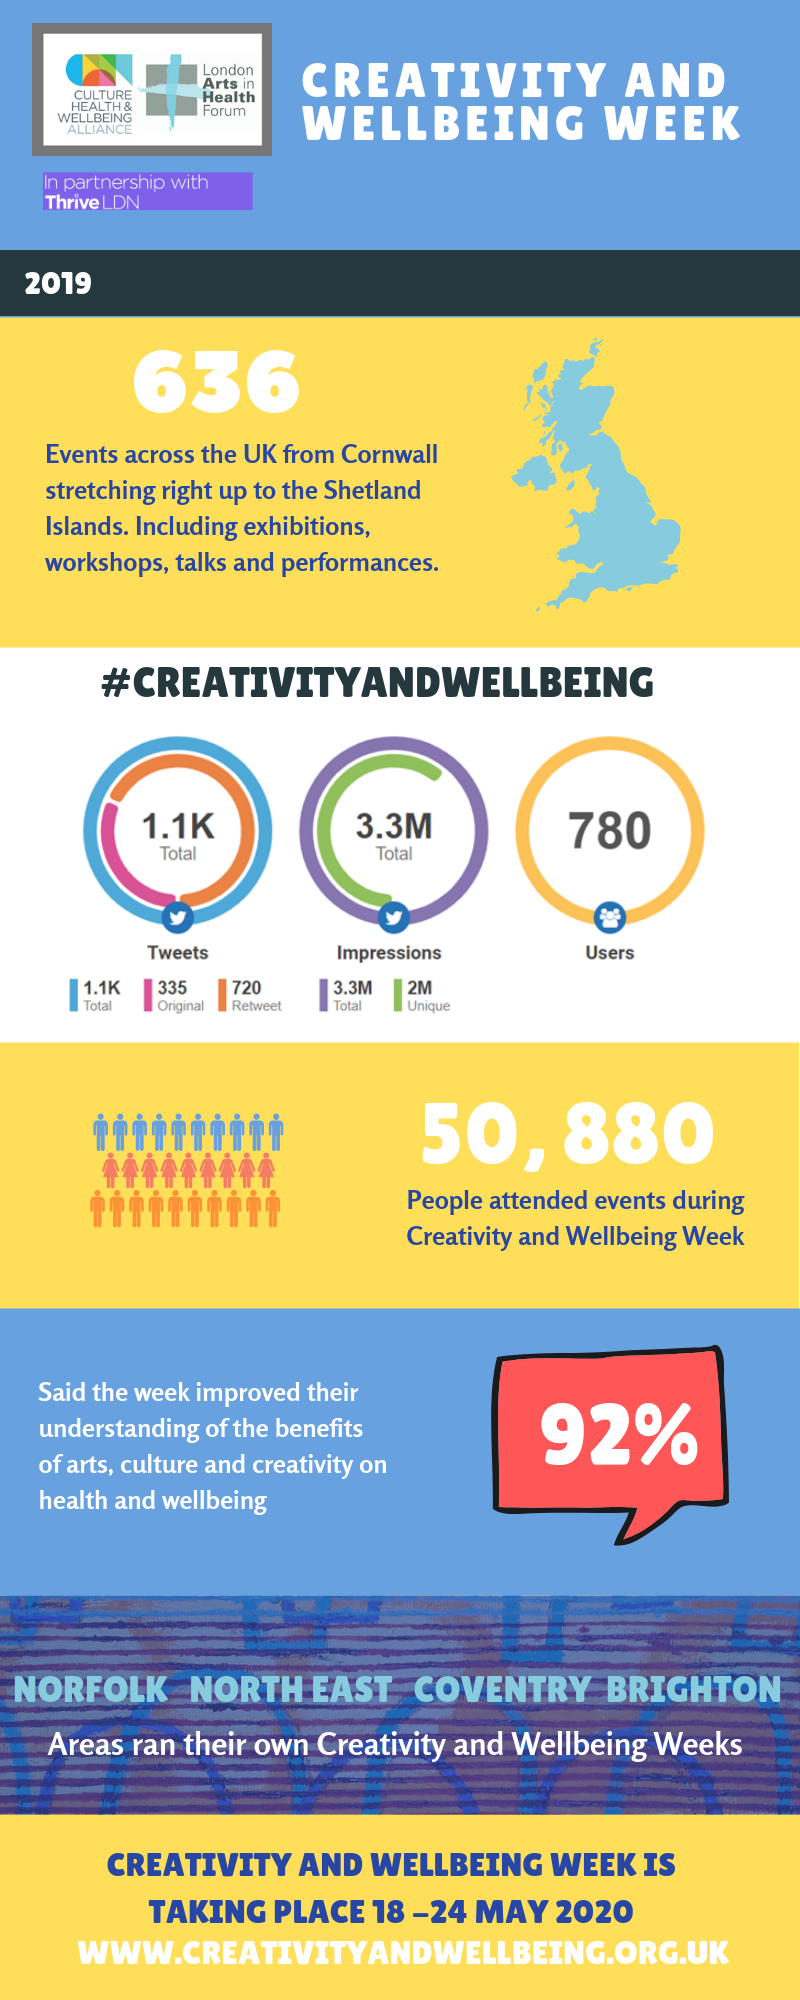 Infographic giving statistics on Creativity & Wellbeing Week 2019: there were 636 events and 50,880 people attended